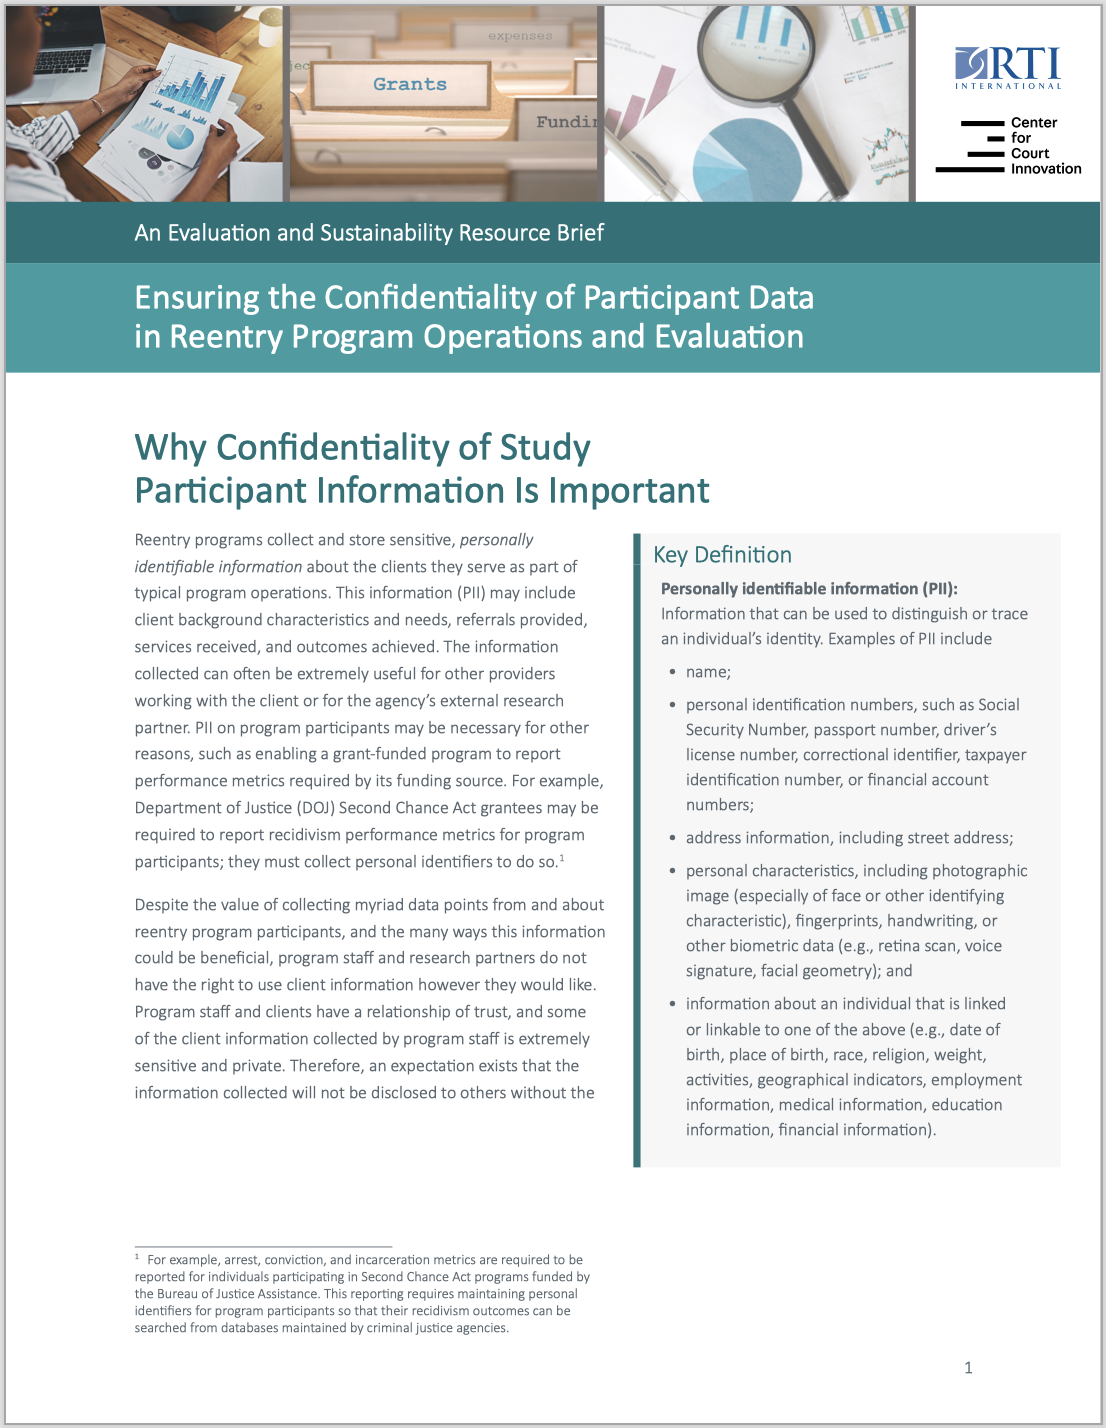 Ensuring the Confidentiality of Participant Data brief cover image